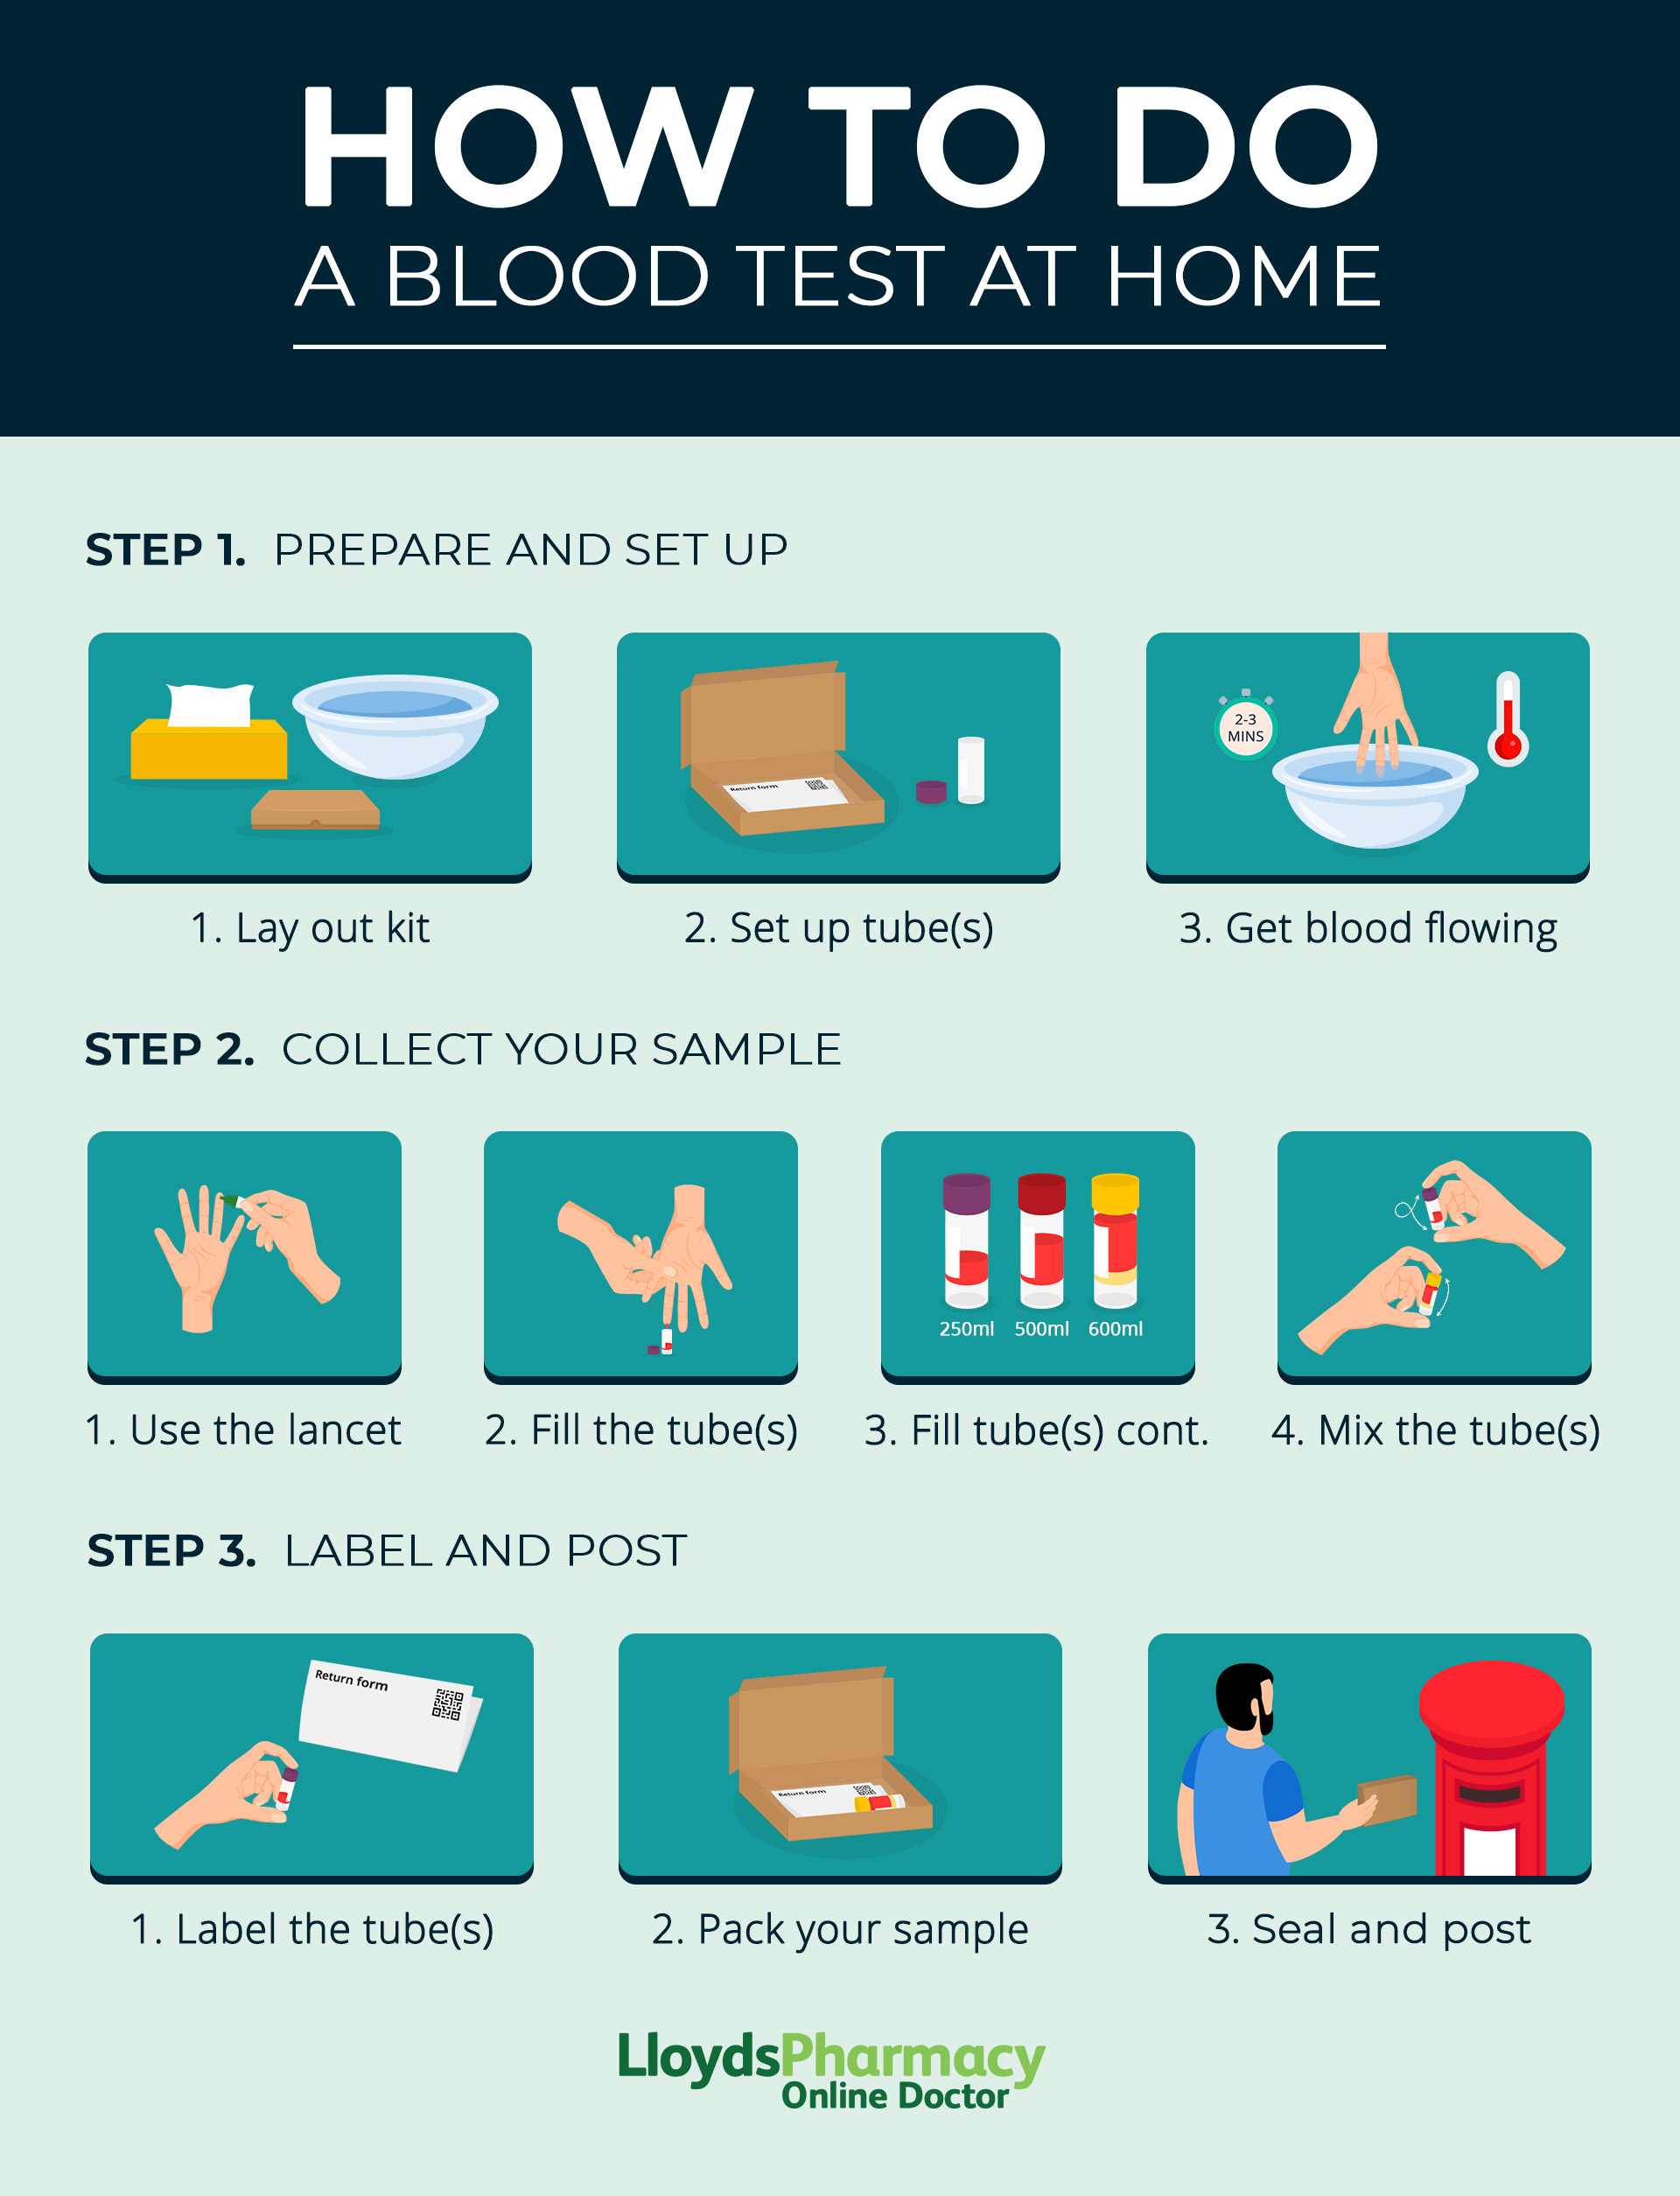 How to do a blood test at home step by step